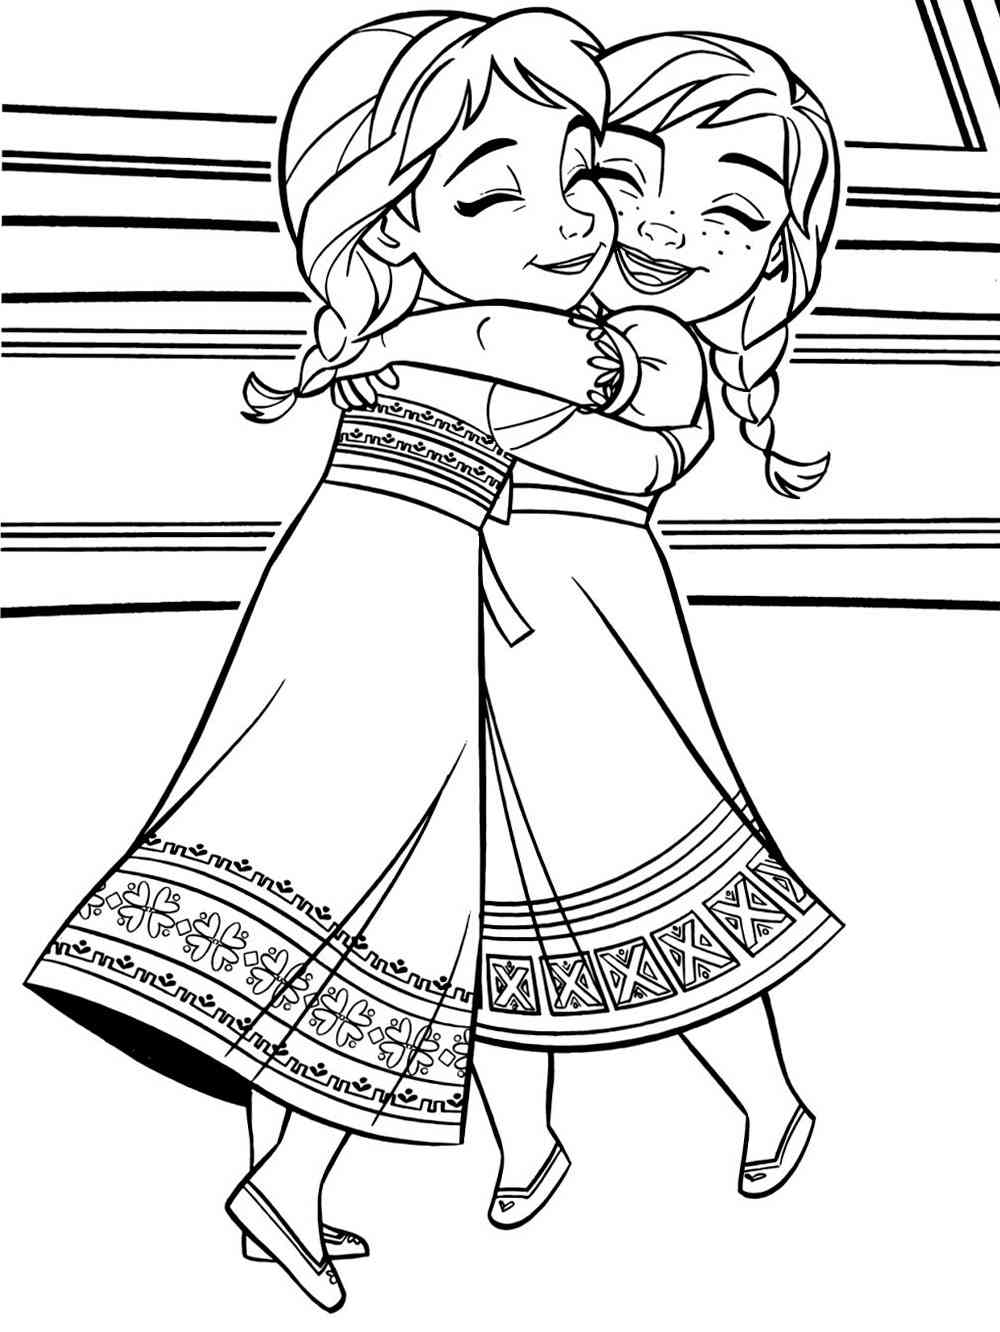 Elsa and Anna 12 coloring page